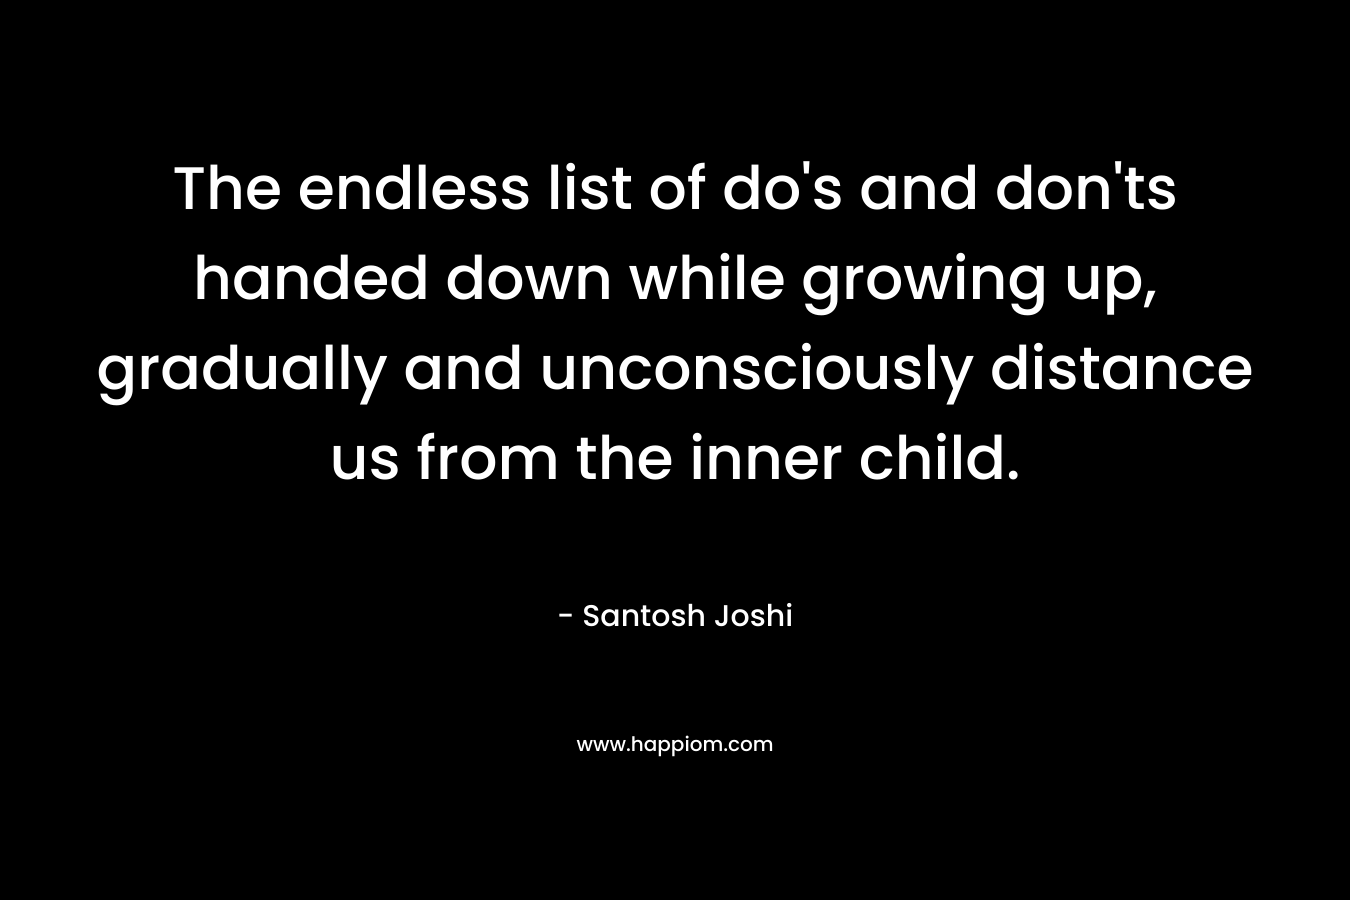 The endless list of do’s and don’ts handed down while growing up, gradually and unconsciously distance us from the inner child. – Santosh Joshi